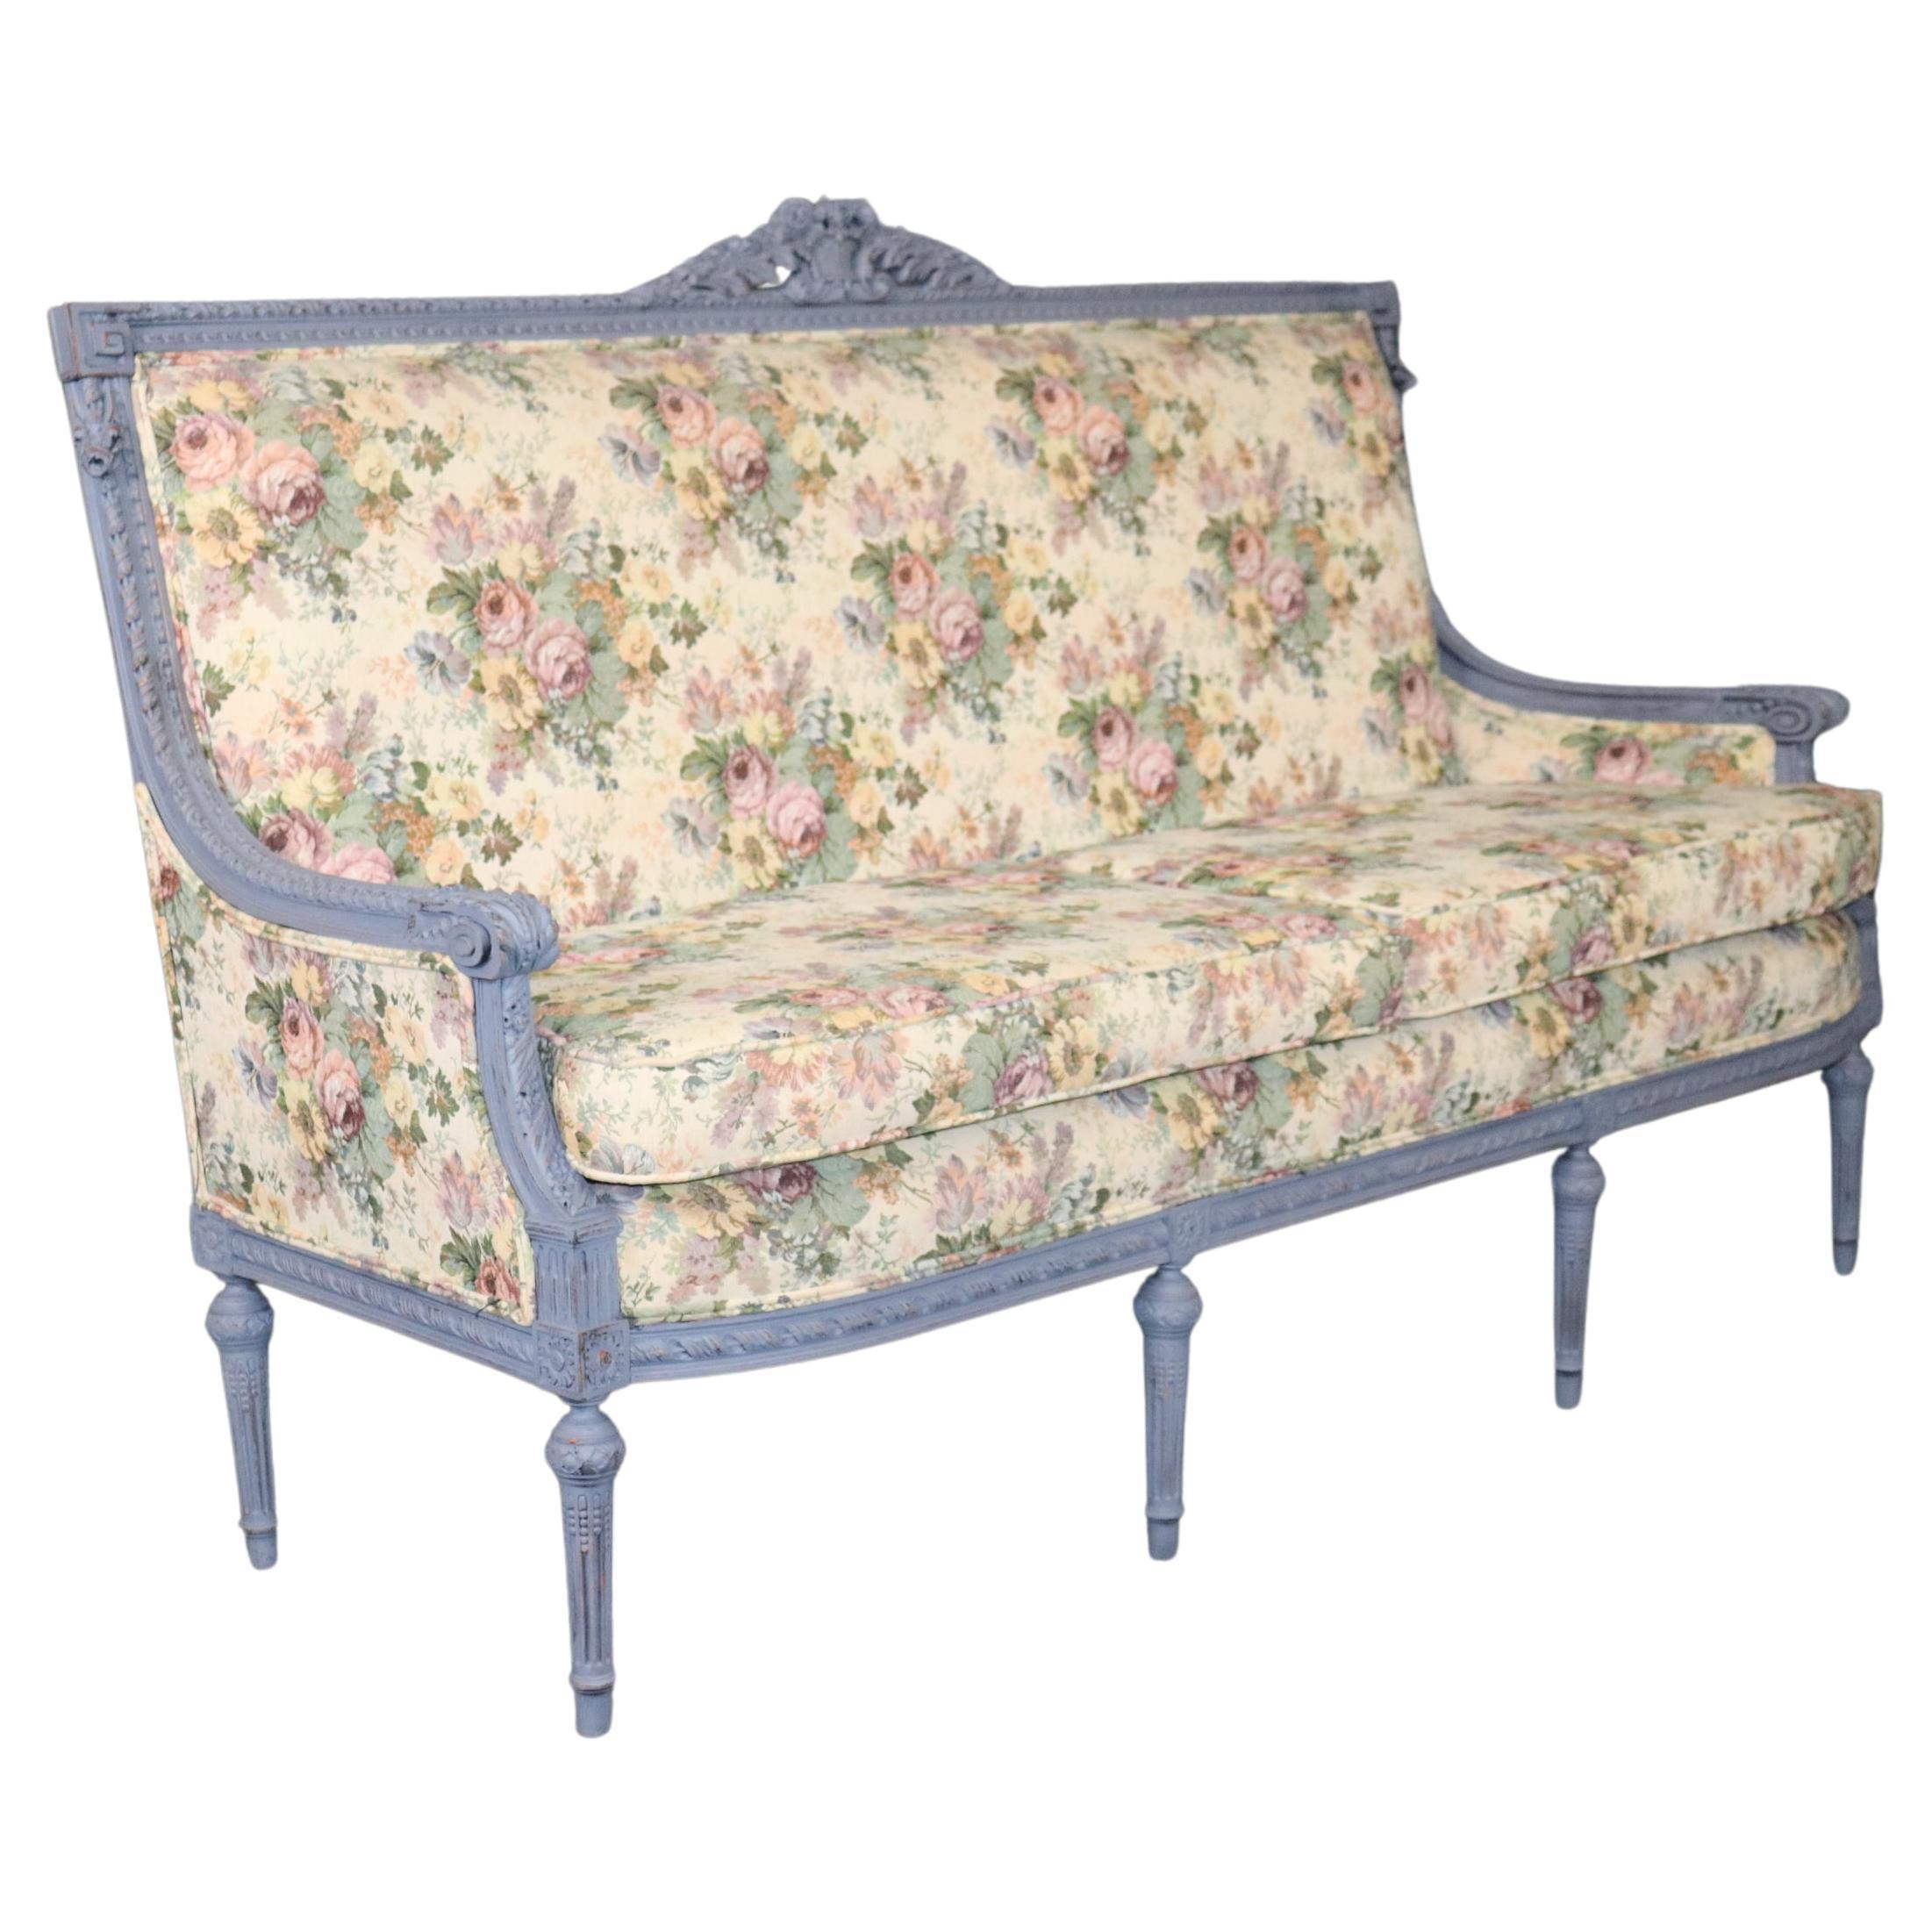 French Louis XIV Style Distressed Paint Decorated Settee With Floral Upholstery For Sale